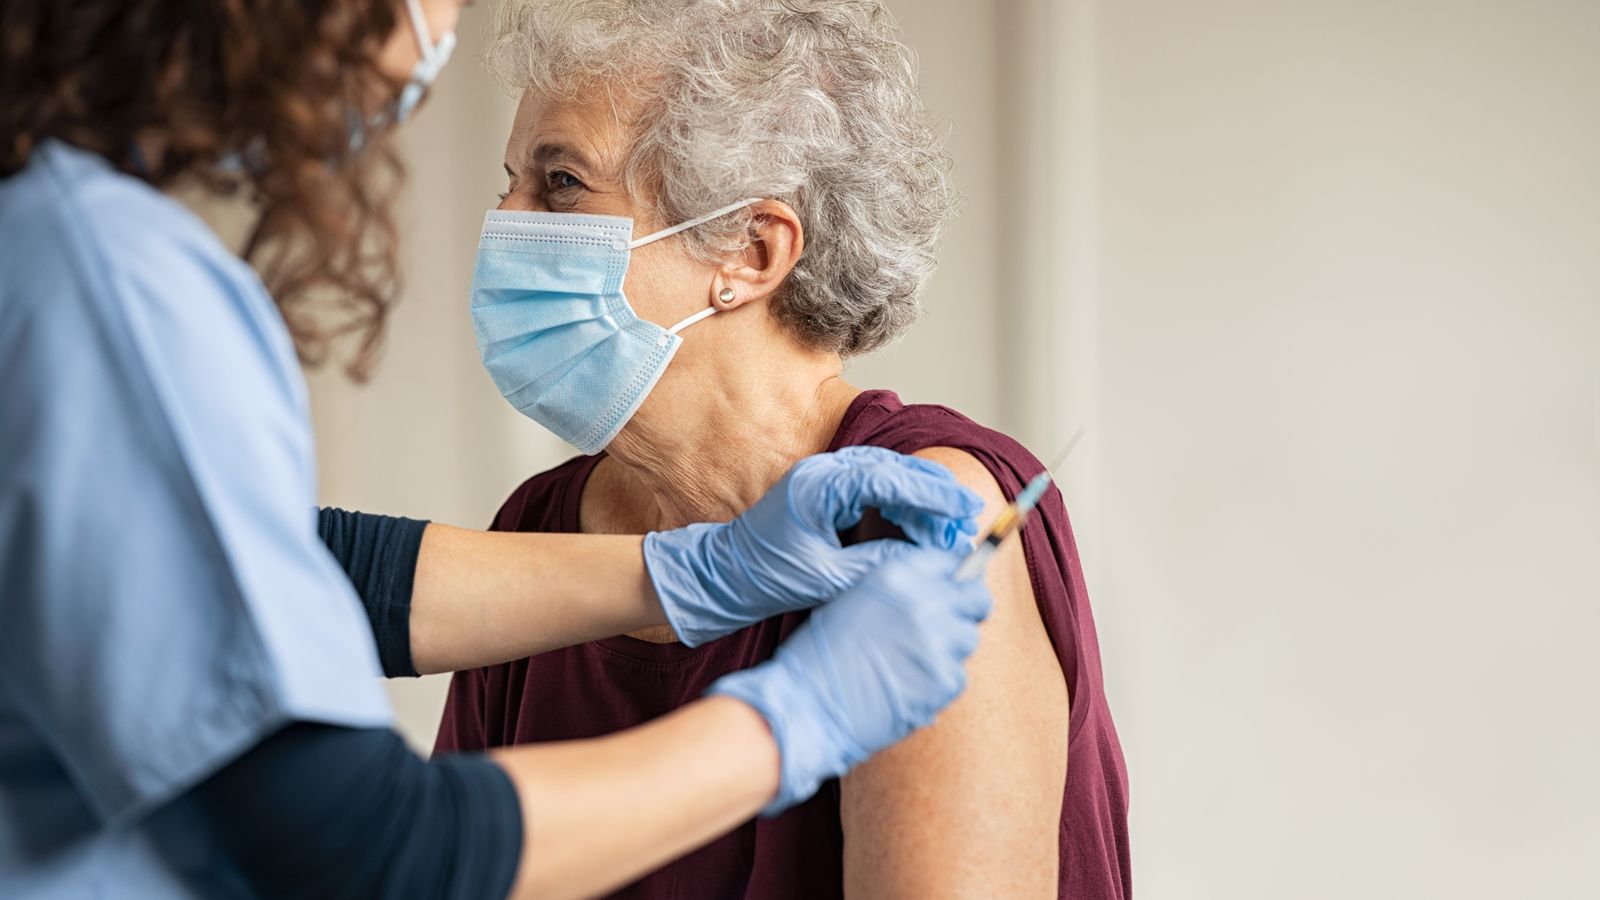 NHS trails online booking for flu jabs for first time as COVID boosters available for over 50s